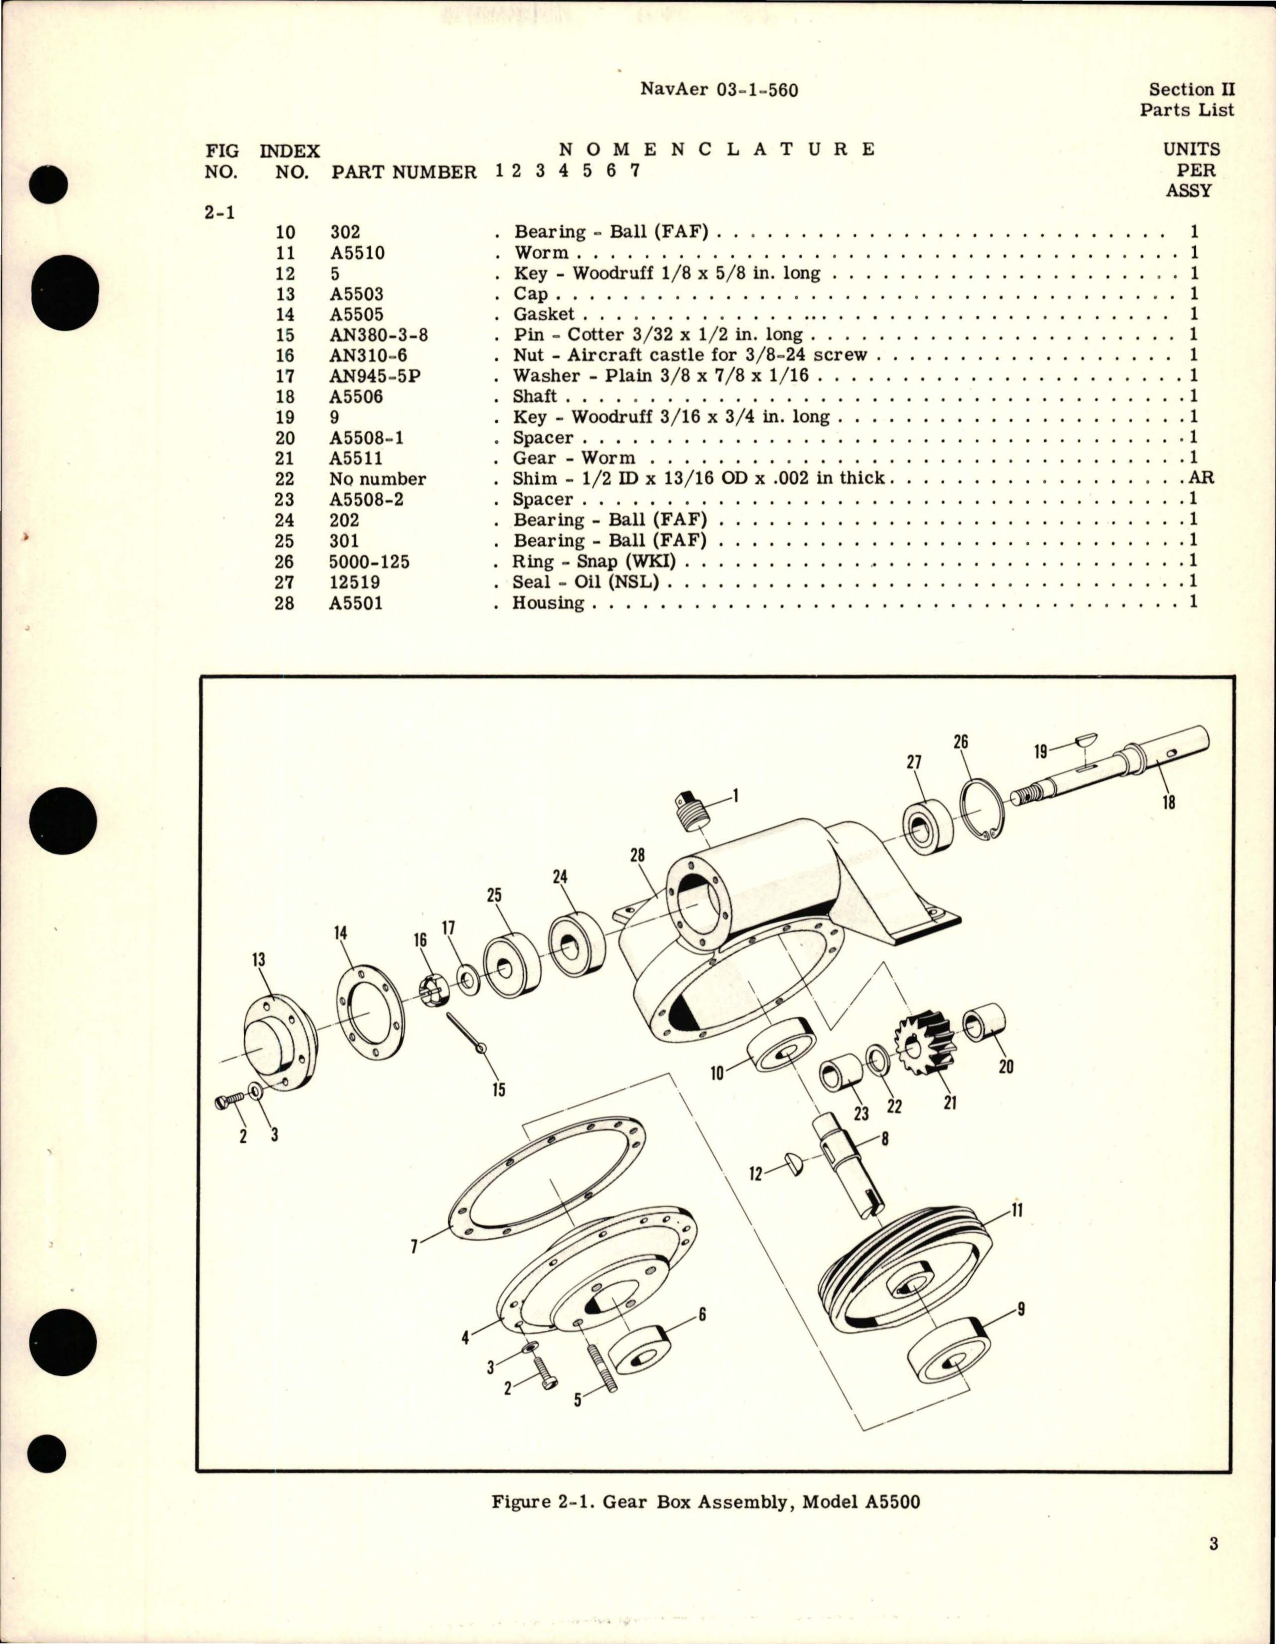 Sample page 5 from AirCorps Library document: Overhaul Instructions with Parts Catalog for Pilot Canopy Gear Box Assembly - Model A 5500 